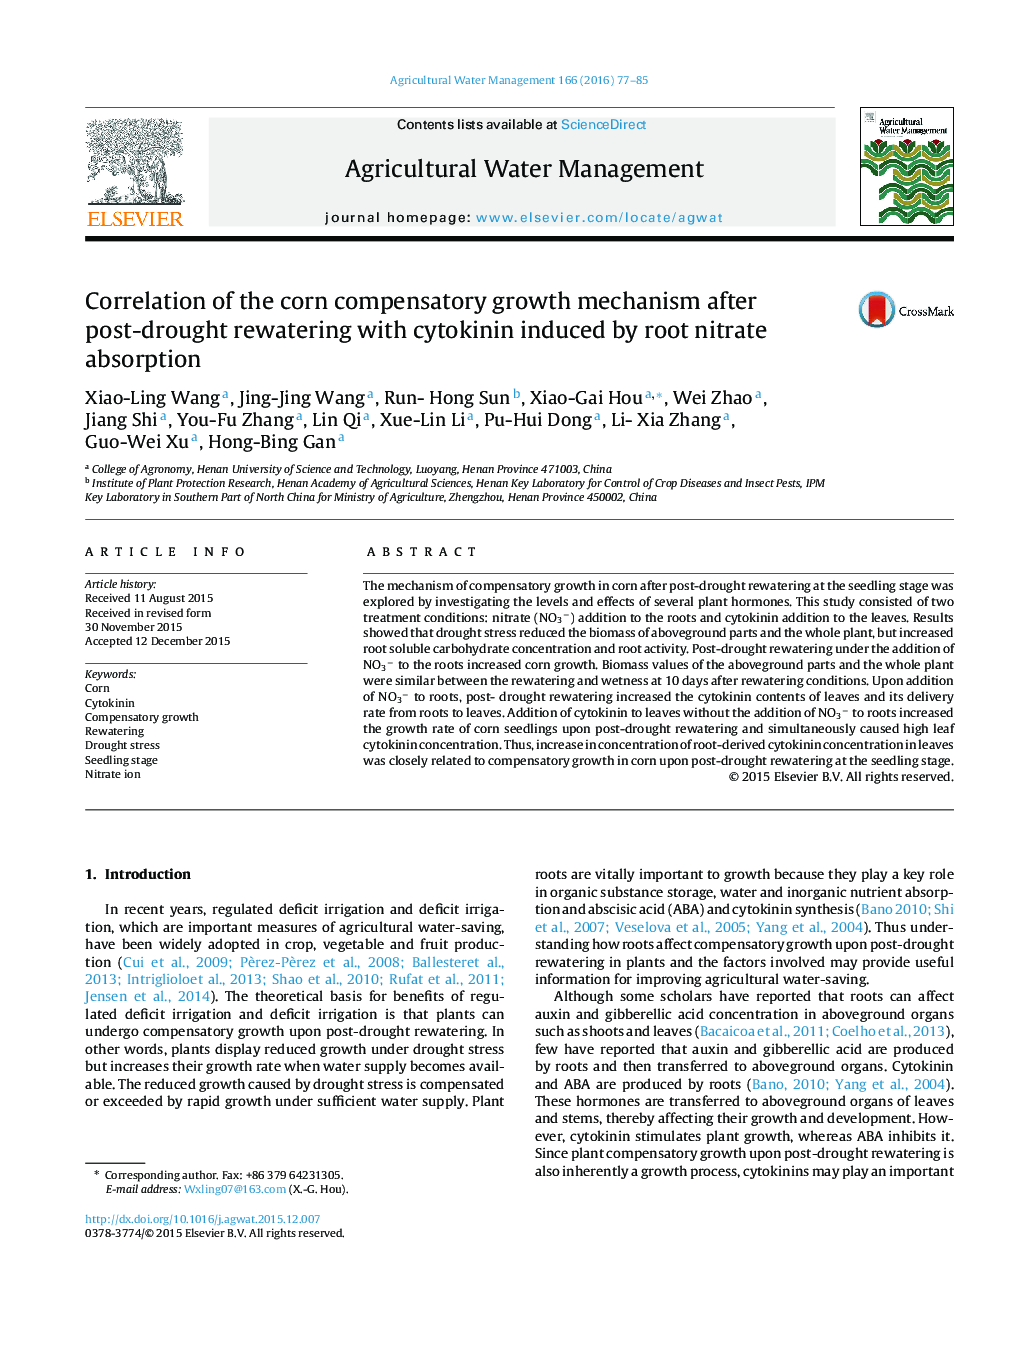 Correlation of the corn compensatory growth mechanism after post-drought rewatering with cytokinin induced by root nitrate absorption